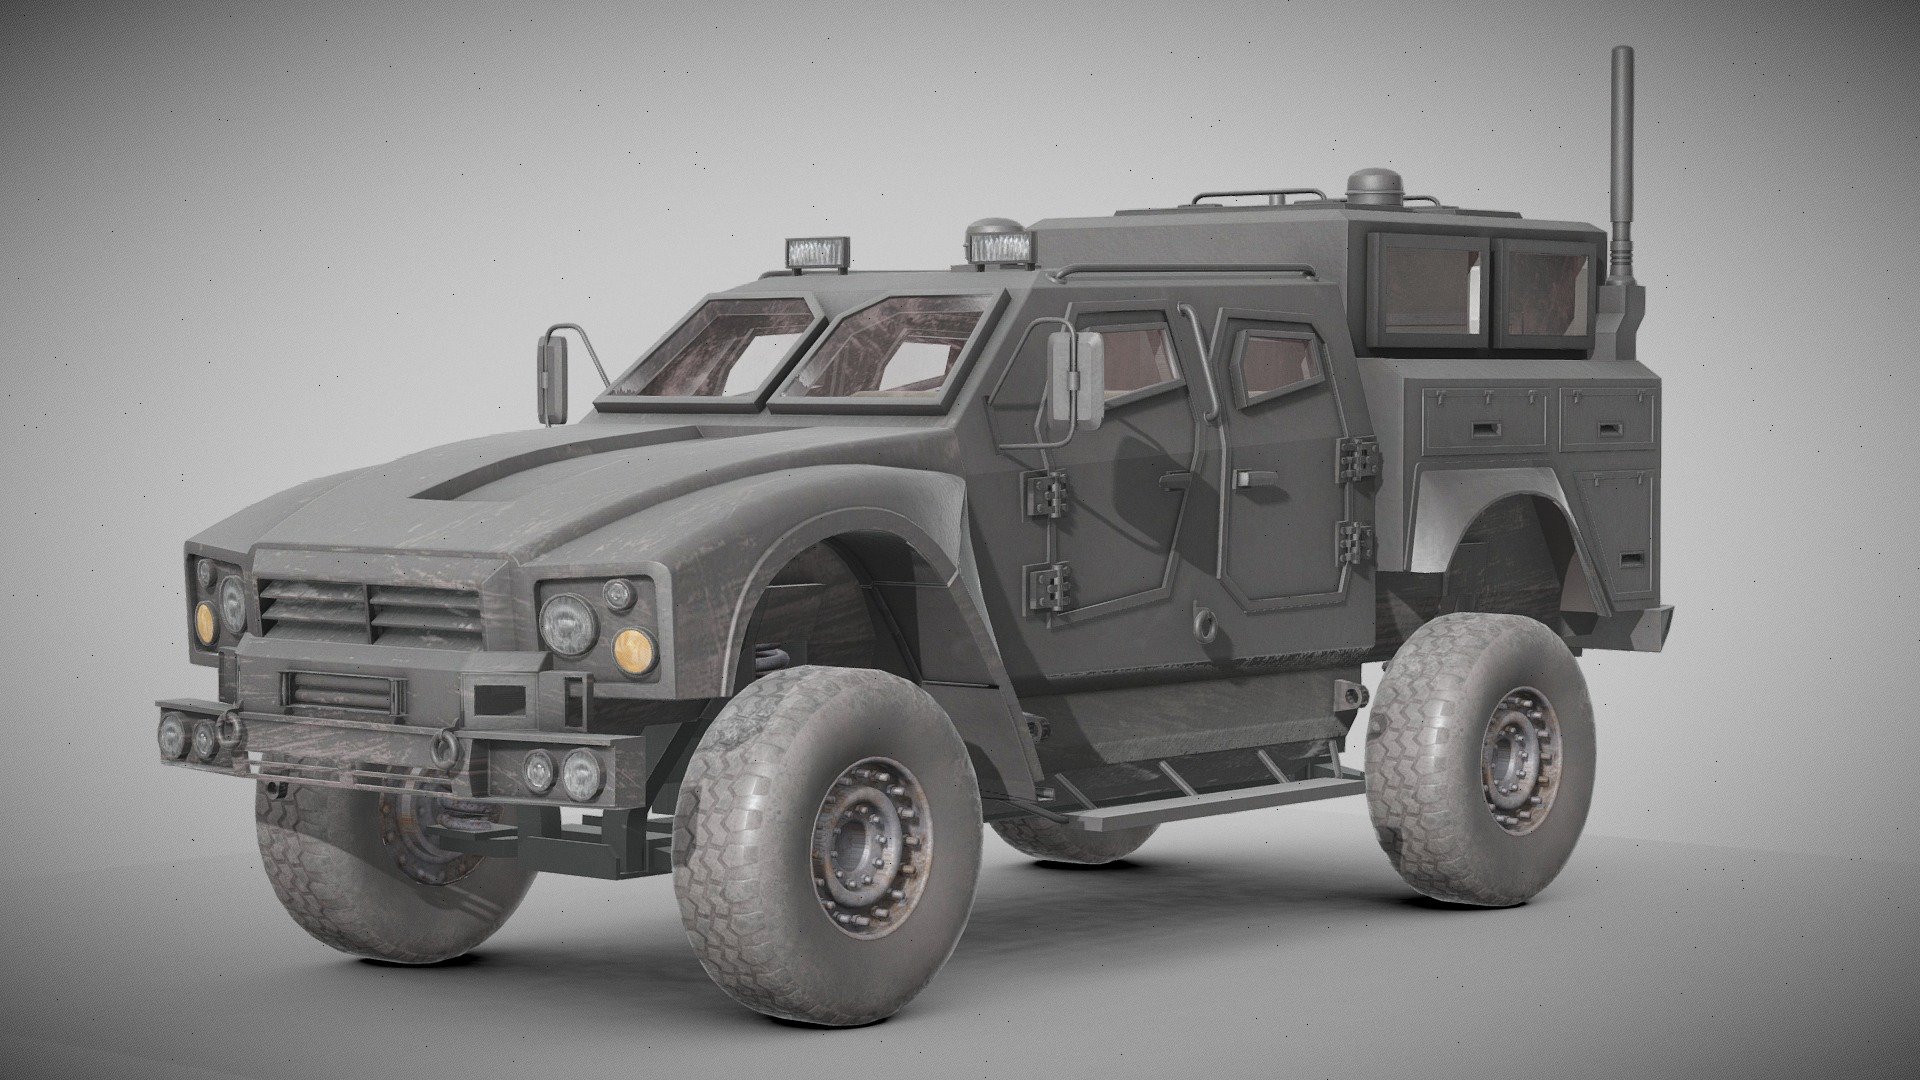 Mid poly model (48k triangles) of an armored police vehicle, modeled in Blender and textured in Substance Painter and Photoshop. 

Suitable for games. All textures are in 2048 resolution, except for the lights, which is 1024. The vehicle is based on Okshosh M-ATV. If you have any questions about anything, feel free to contact me - [Free] Armored Police Vehicle - Download Free 3D model by Roam_Man 3d model